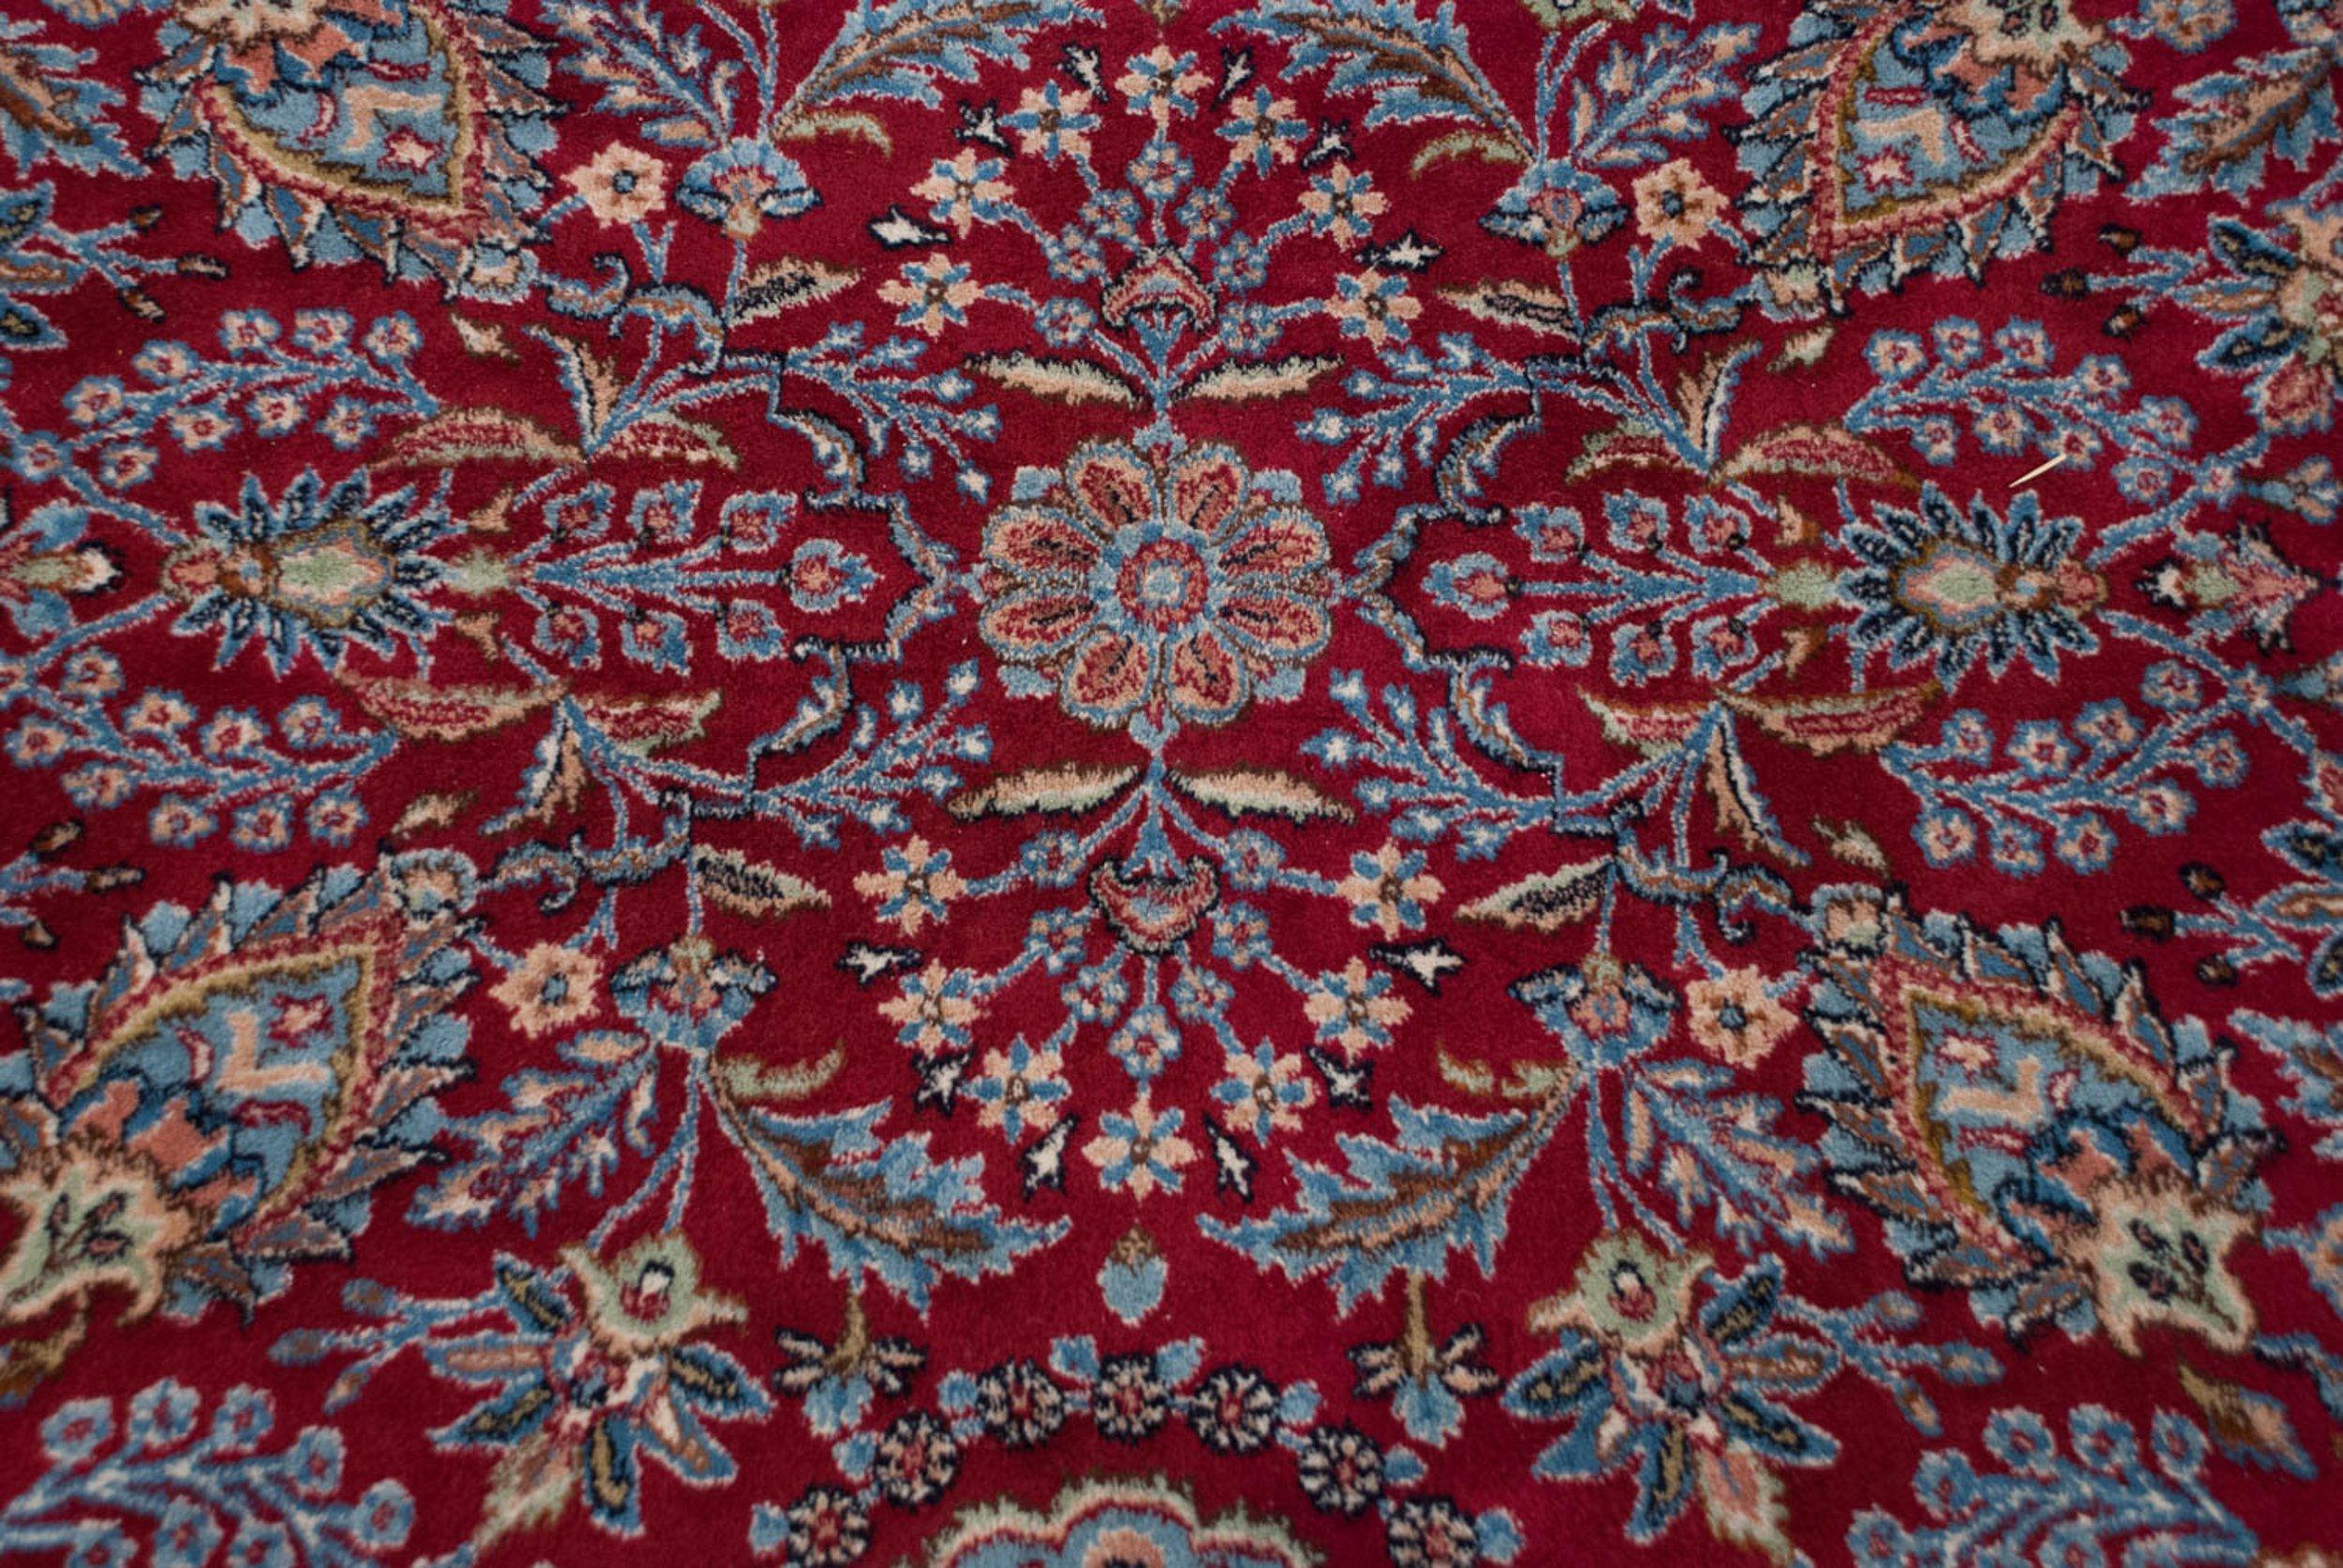 :: Covered field of multi-minor medallions and large floral bouquets bearing palmette cross-sections, pomegranate top views, and thousand flower inspired design elements. Inner and outer minor border in a unique diminutive floral arabesque. Colors